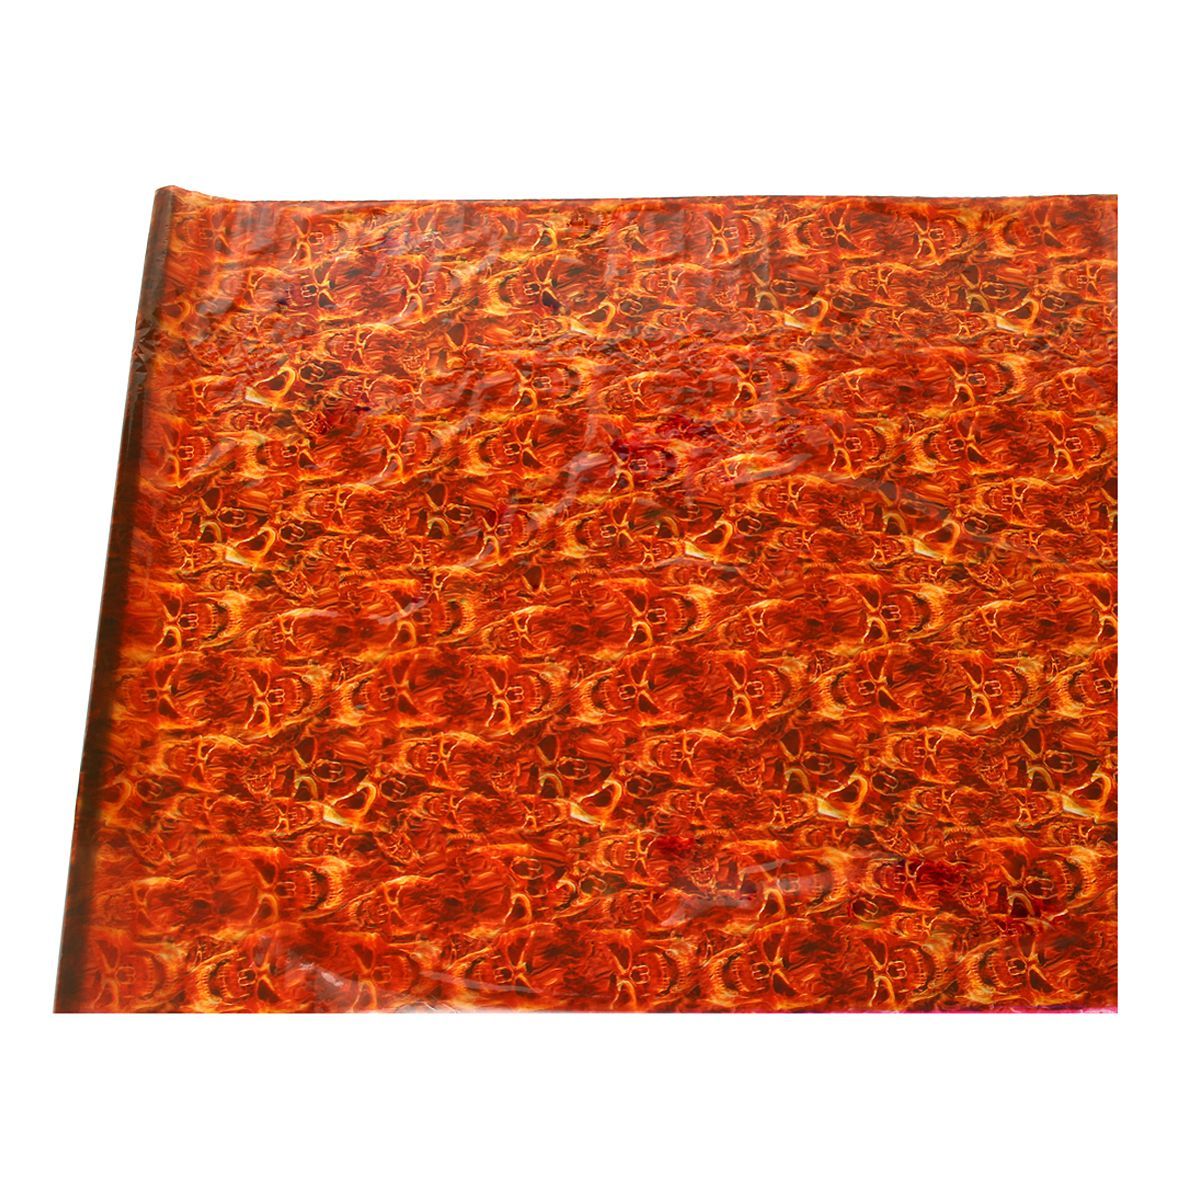 50x100cm-Flame-Film-Hydrographic-Water-Transfer-DIY-Printing-DIP-Hydro-Dipping-Decorations-1542525